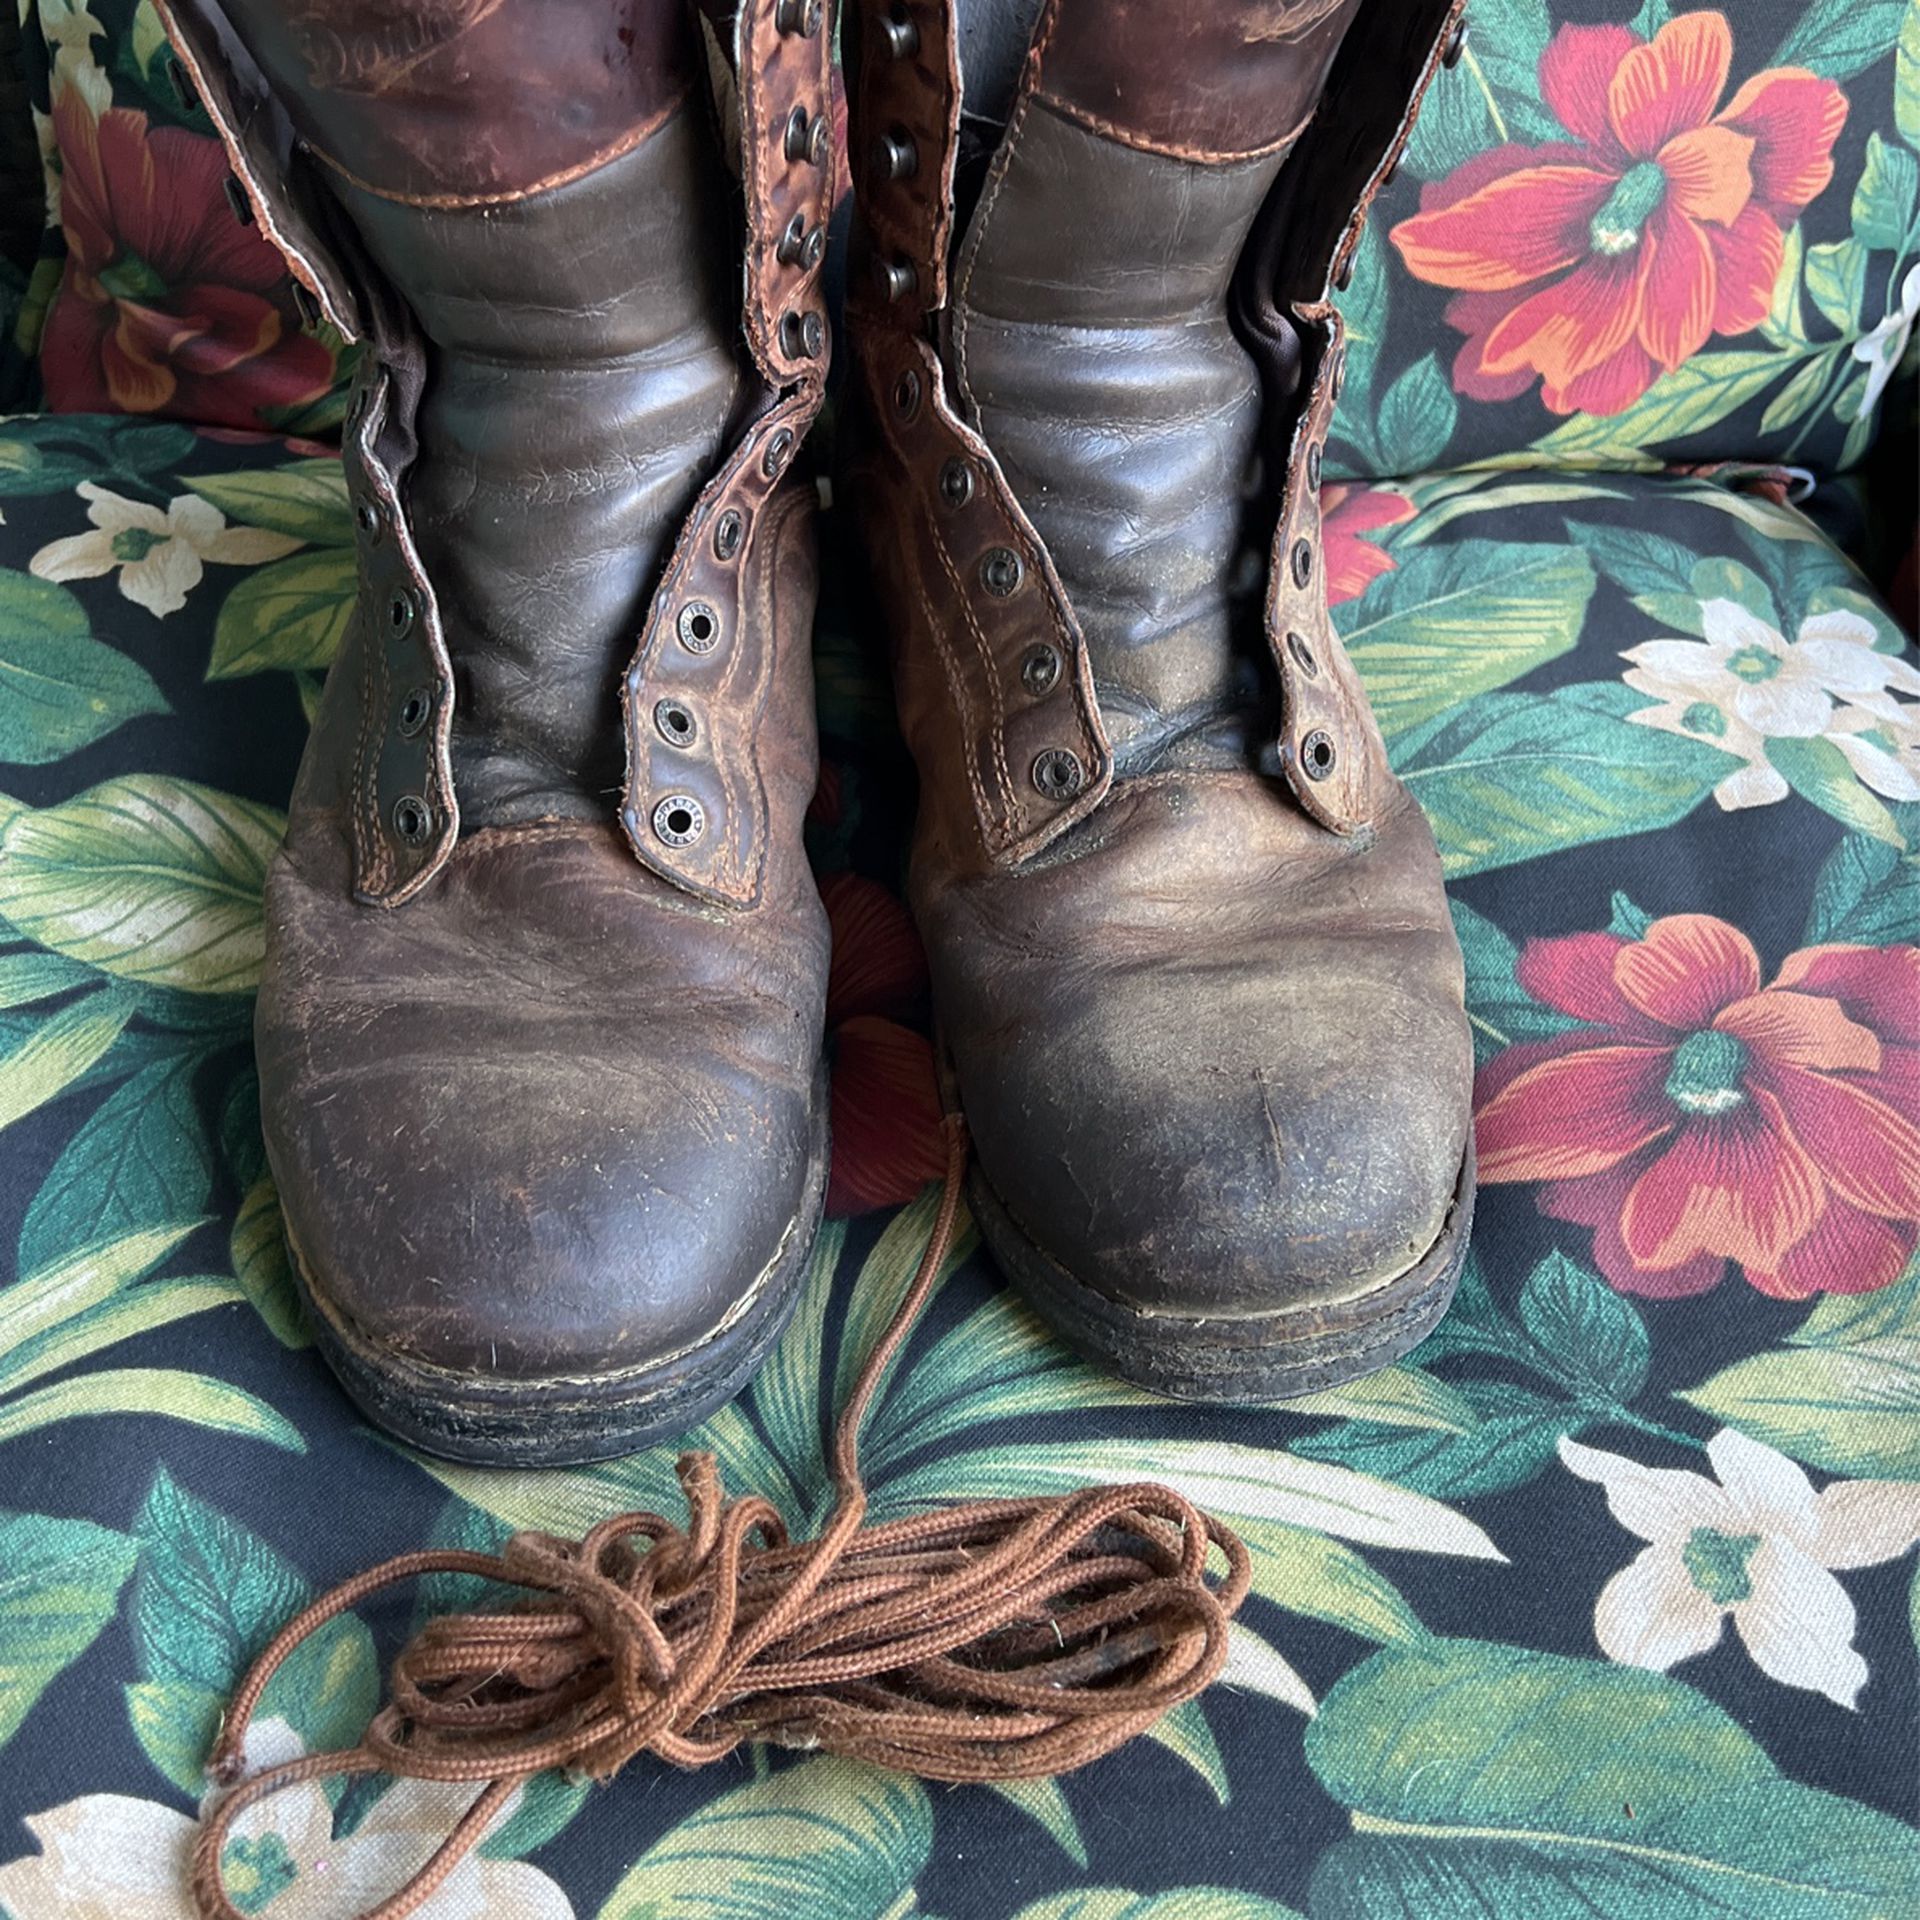 Danner Mens 13 Leather Work Boots Used May Need Some TLC Still Lots Of Life Left View Pictures Ask ?s